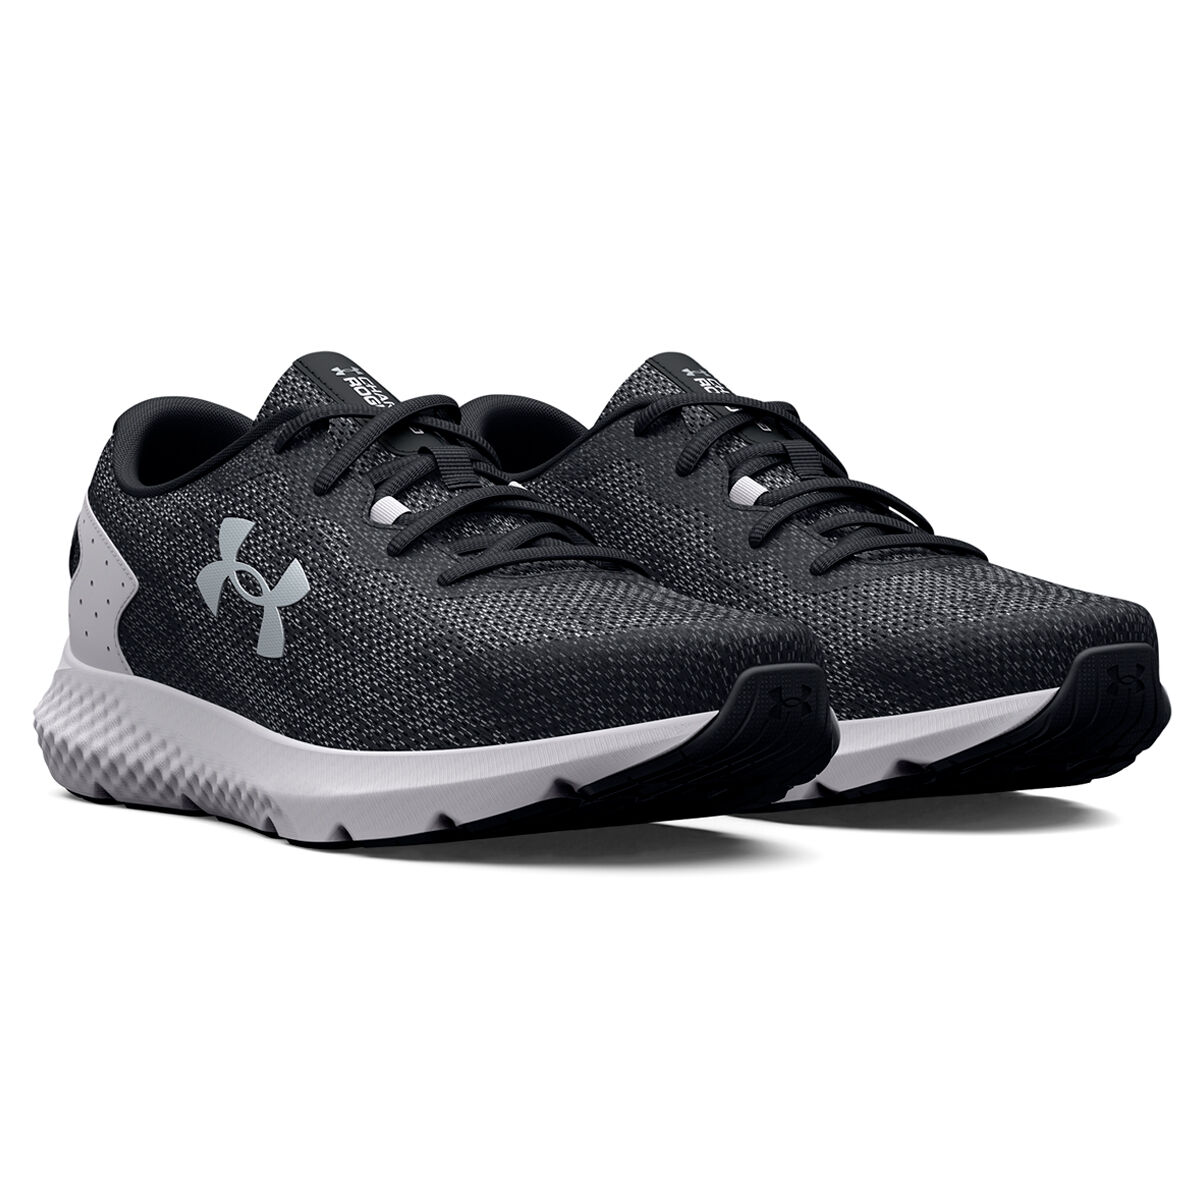 Under Armour Charged Rogue 3 - Men's